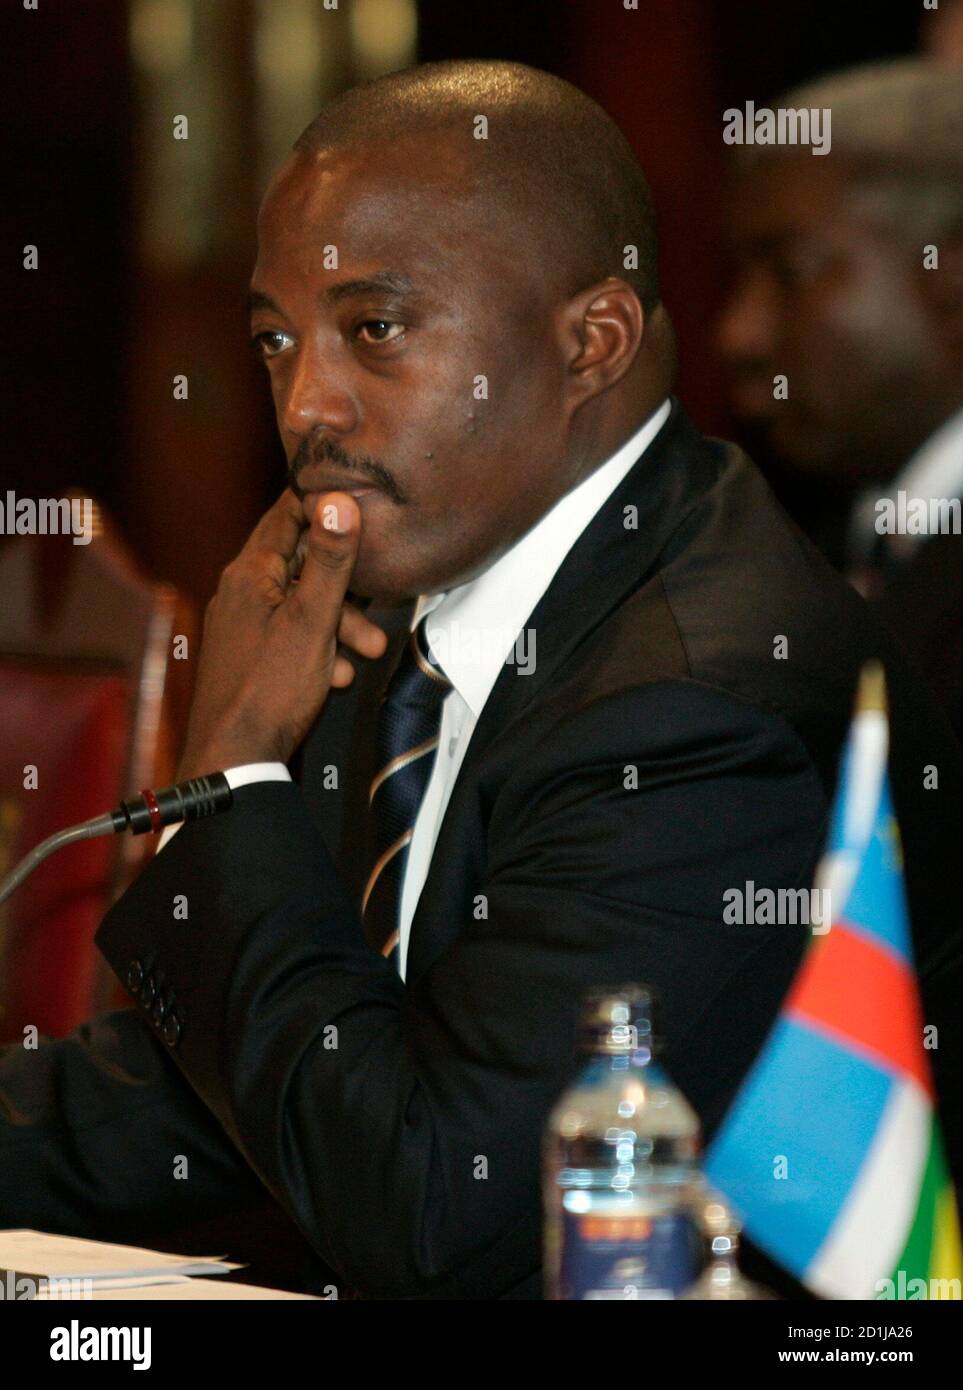 Democratic Republic of Congo's President Joseph Kabila attends the opening session of the summit on the ongoing war crisis in eastern Congo in Kenya's capital Nairobi, November 7, 2008. Congolese Tutsi rebels and government troops fought near a refugee camp in east Congo on Friday, forcing thousands of civilians to flee in panic. REUTERS/Thomas Mukoya (KENYA) Stock Photo